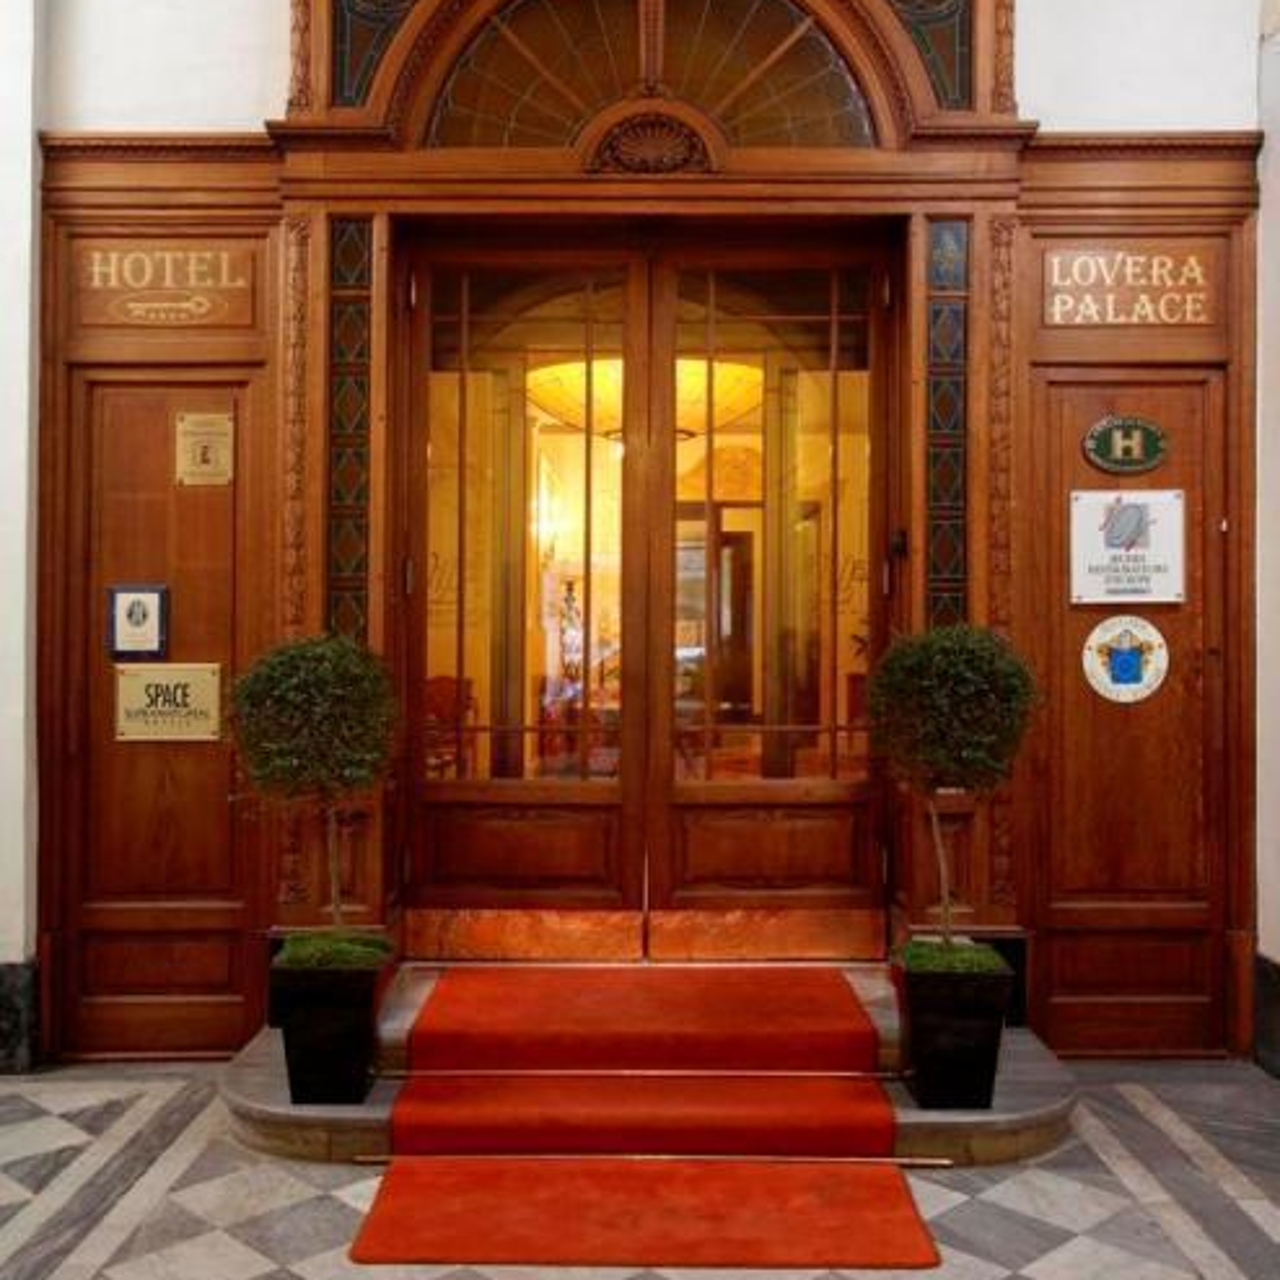 Hotel The Originals Palazzo Lovera (ex Relais du Silence) - 4 HRS star hotel  in Cuneo (Piedmont)